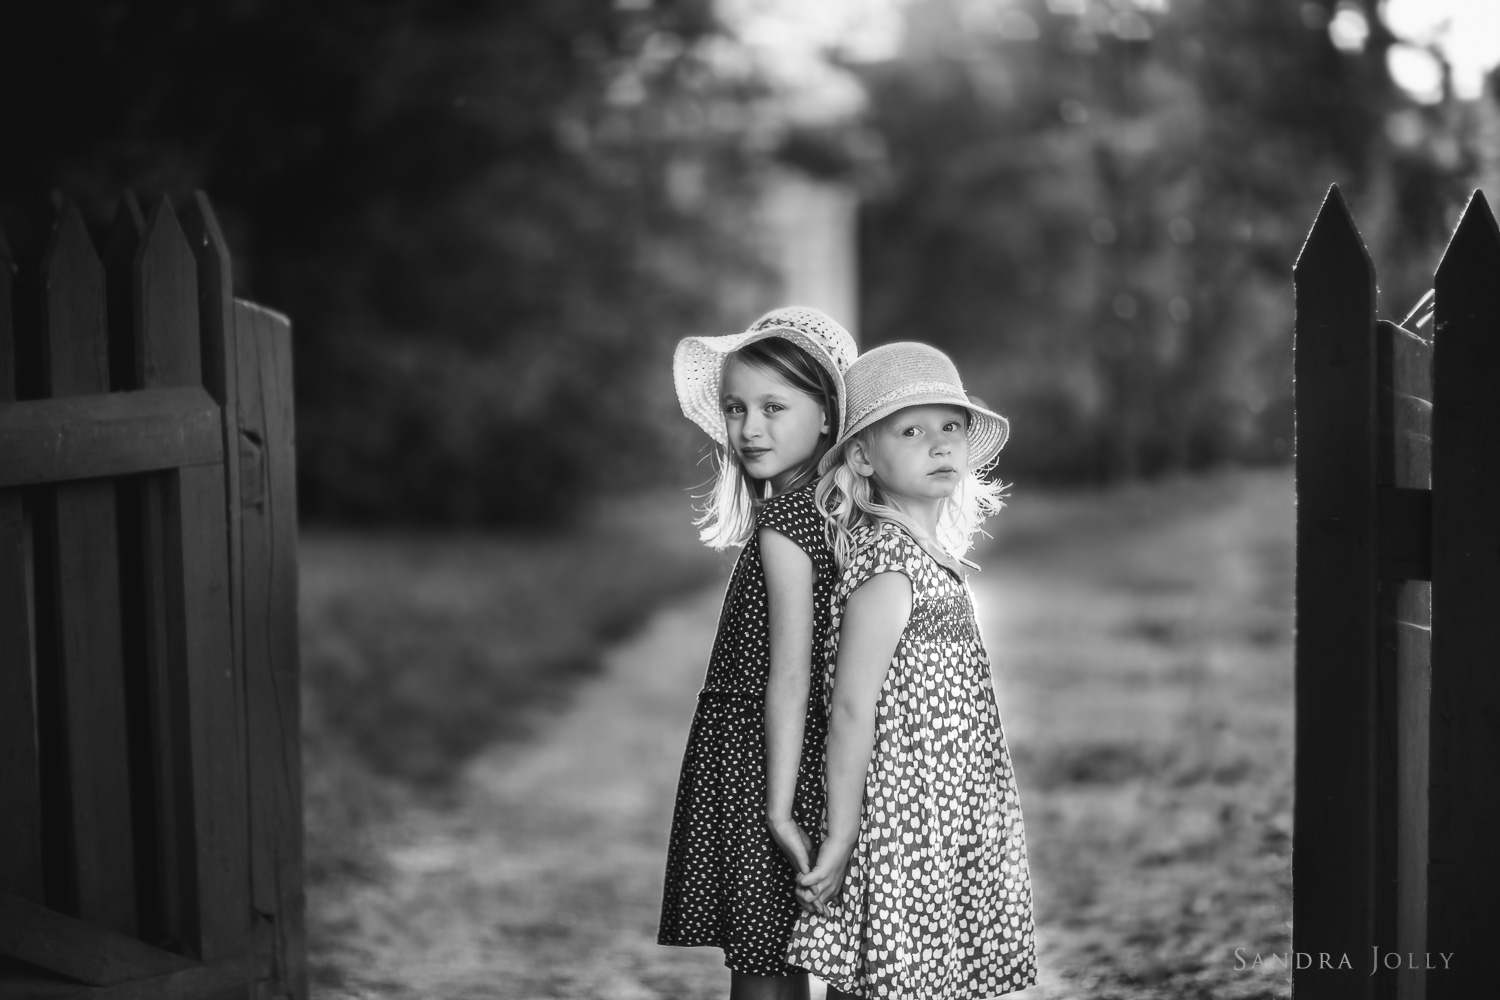 black-and-white-photo-of-sisters-by-Stockholm-family-photographer-Sandra-Jolly.jpg